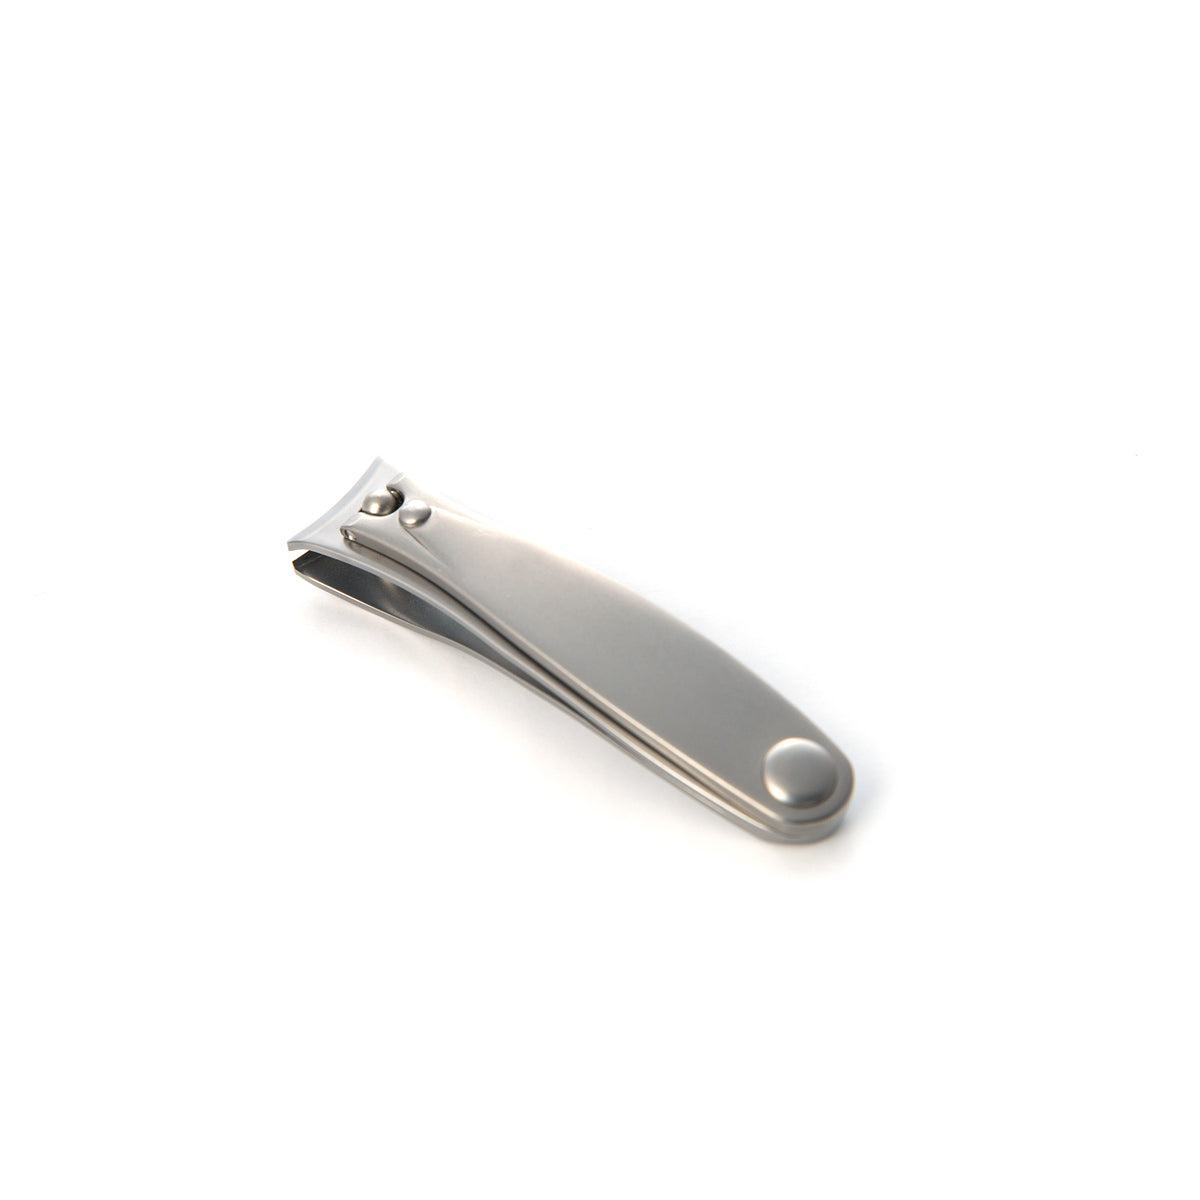 Hardened Stainless Steel Nail Clippers (S)